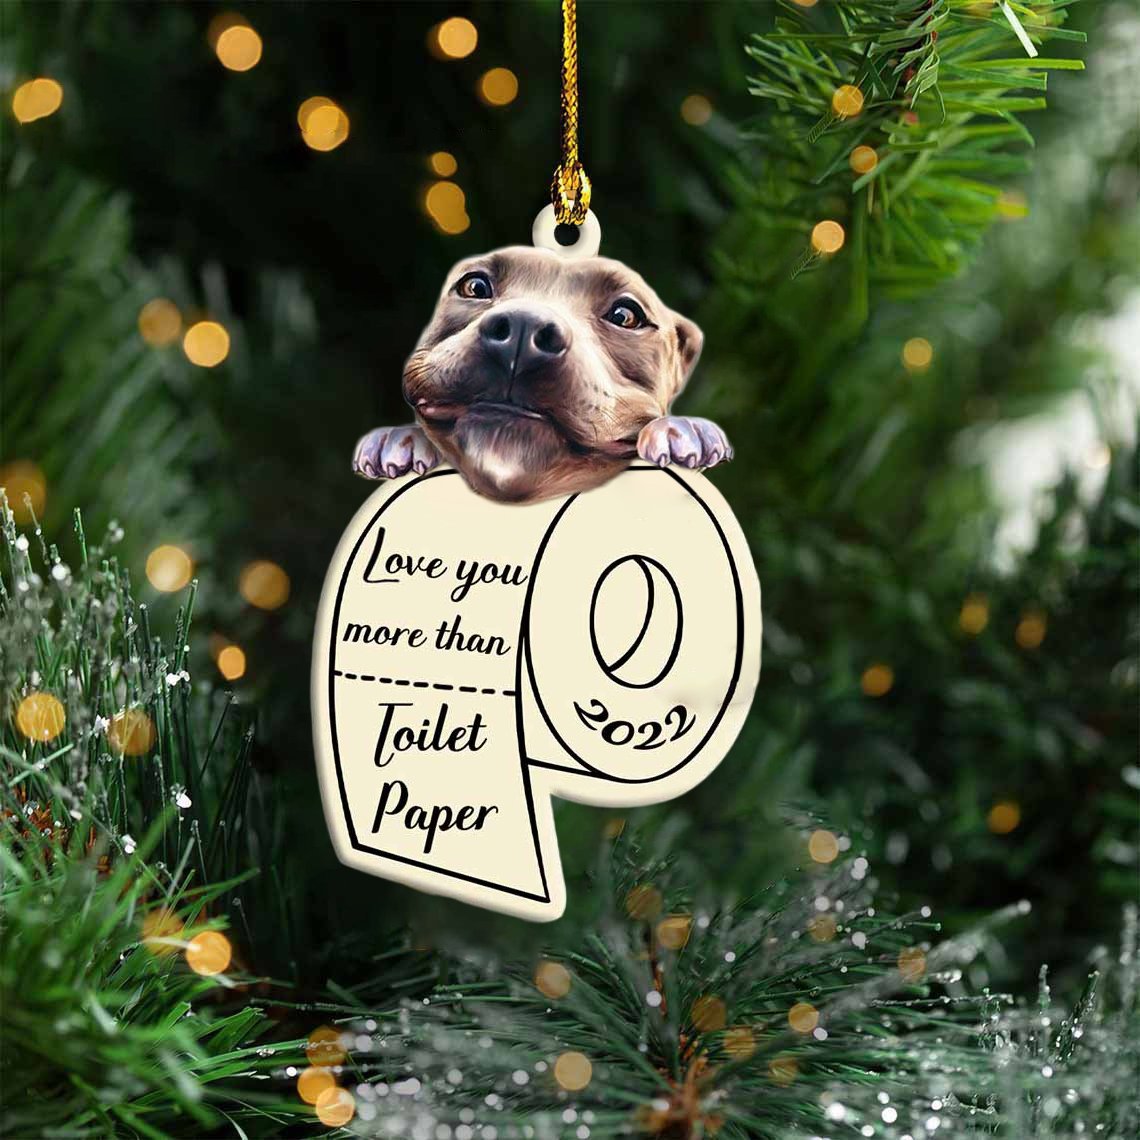 Pitbull Love You More Than Toilet Paper 2022 Hanging Ornament